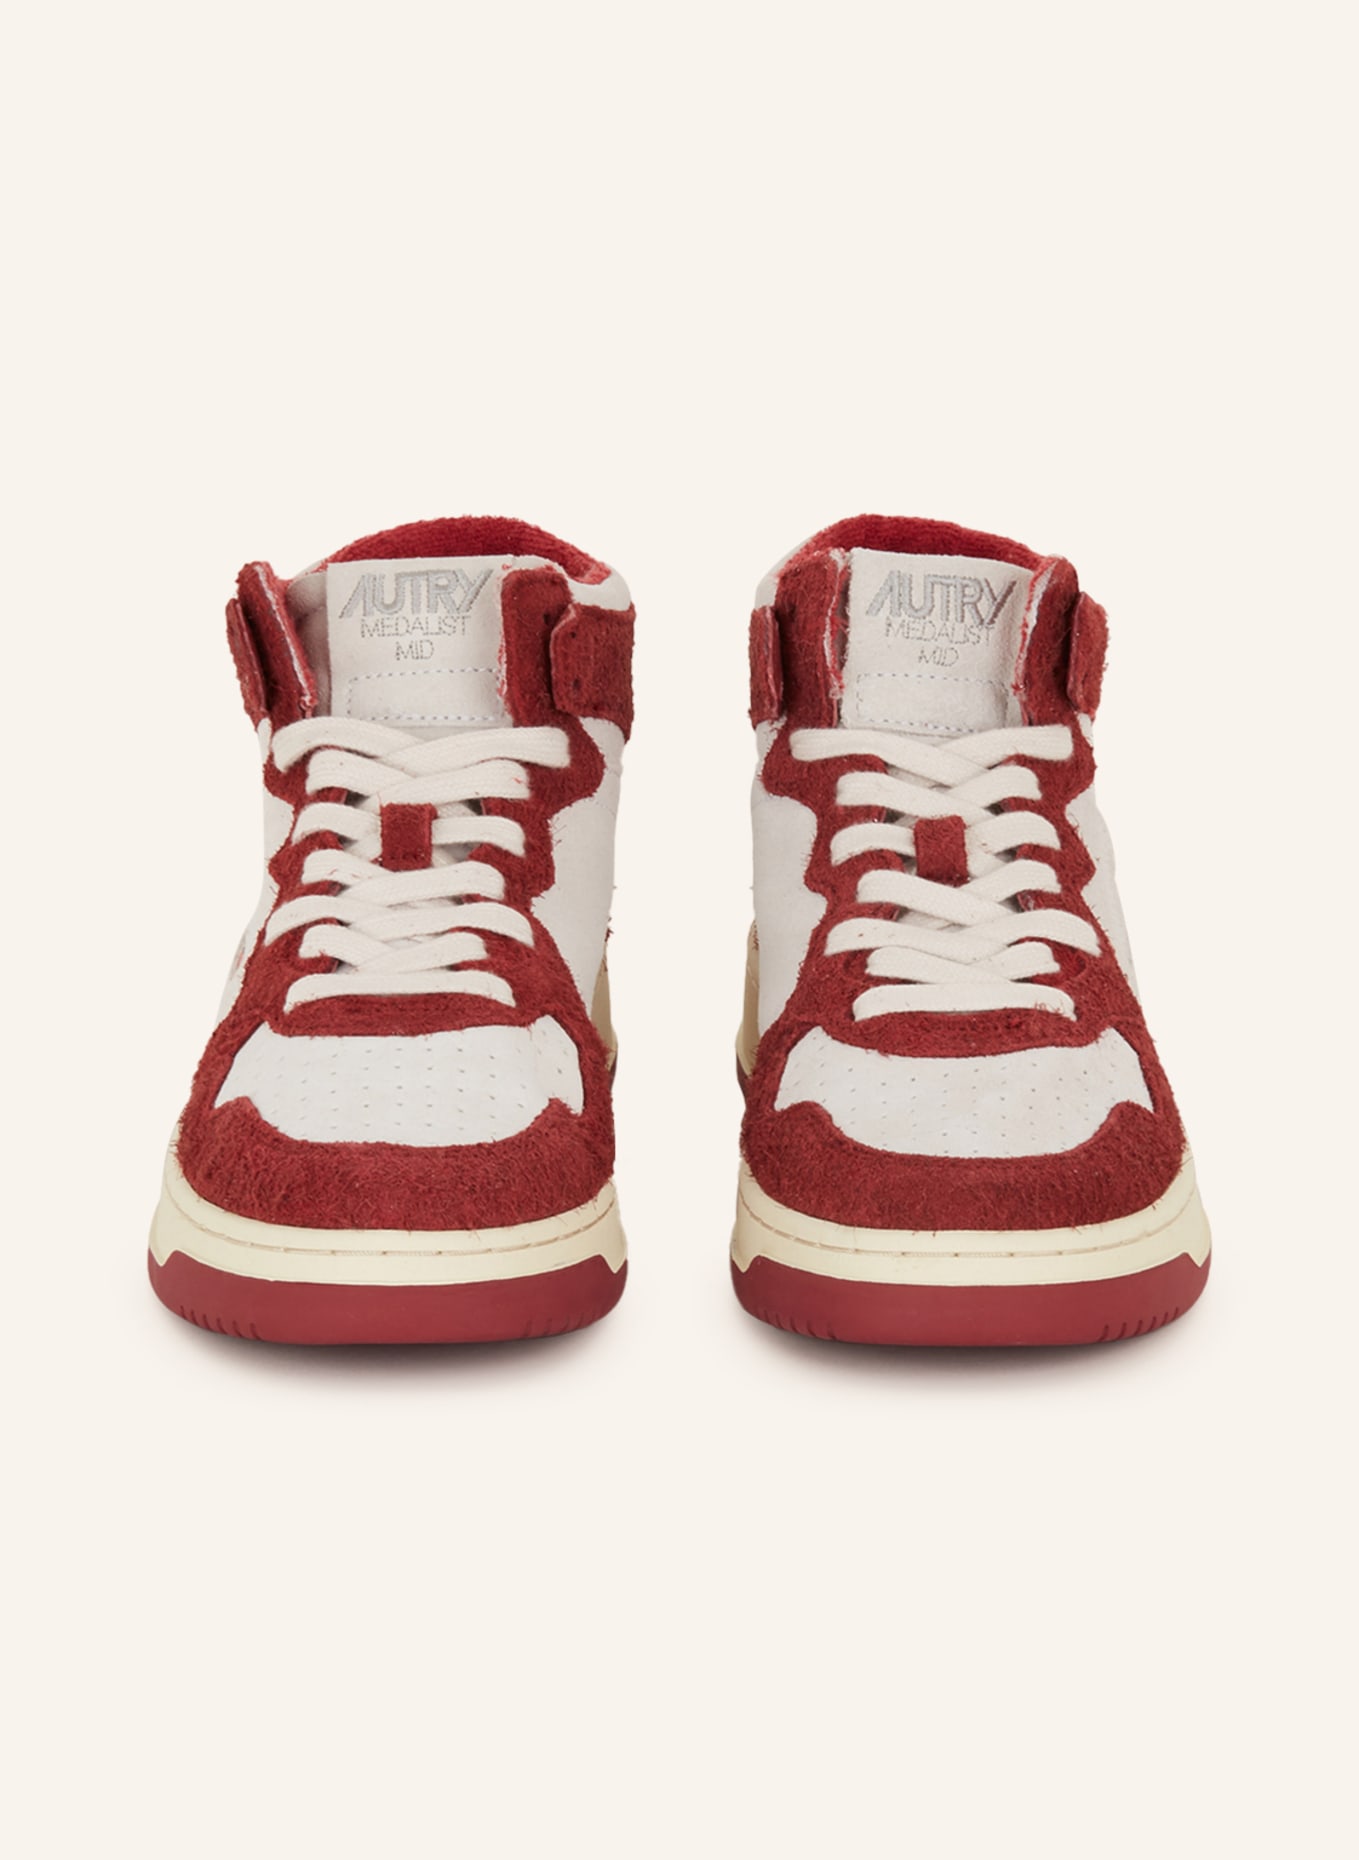 AUTRY High-top sneakers MEDALIST, Color: CREAM/ DARK RED (Image 3)